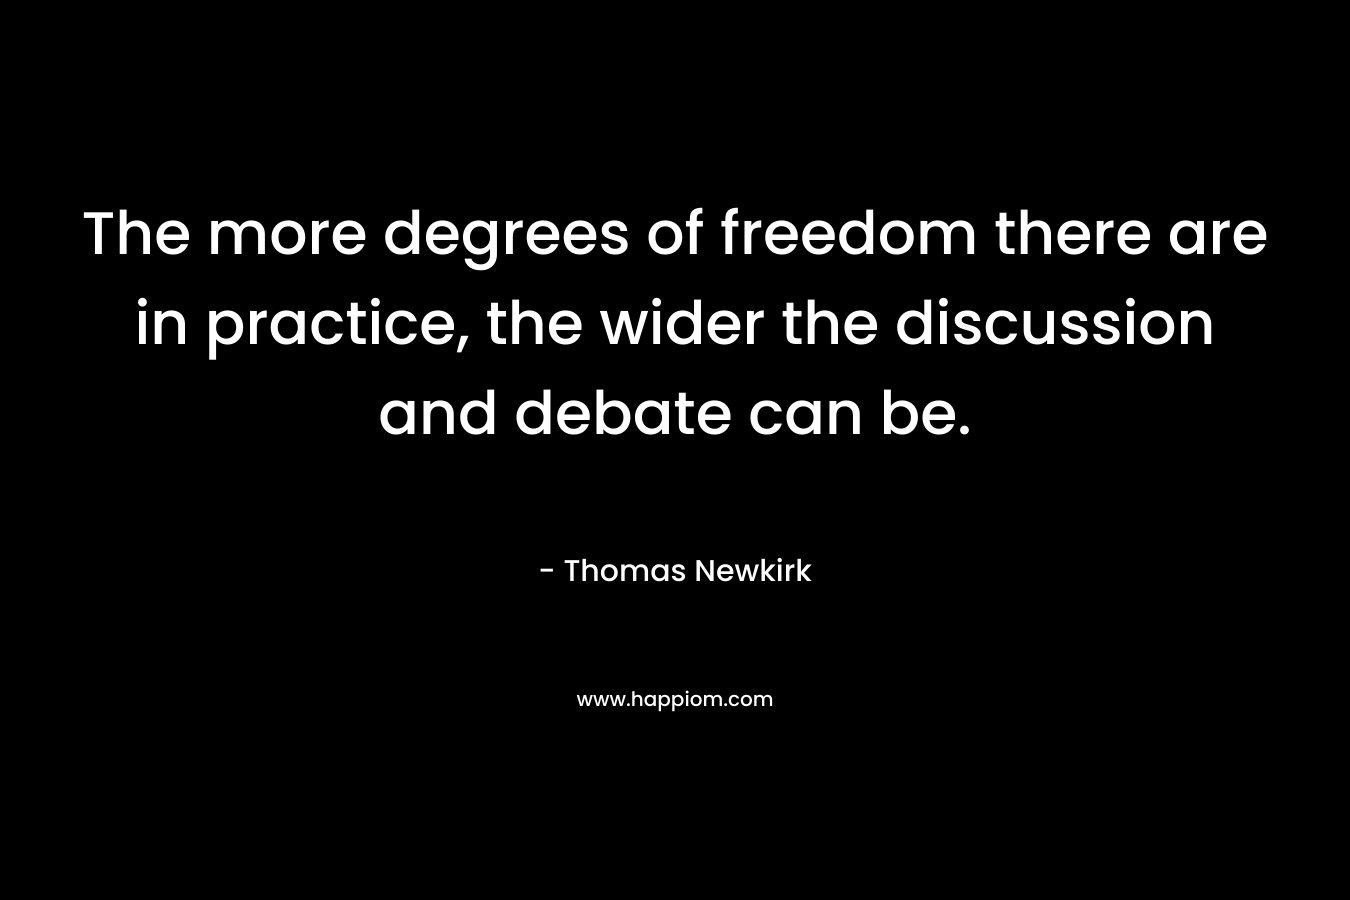 The more degrees of freedom there are in practice, the wider the discussion and debate can be. – Thomas Newkirk